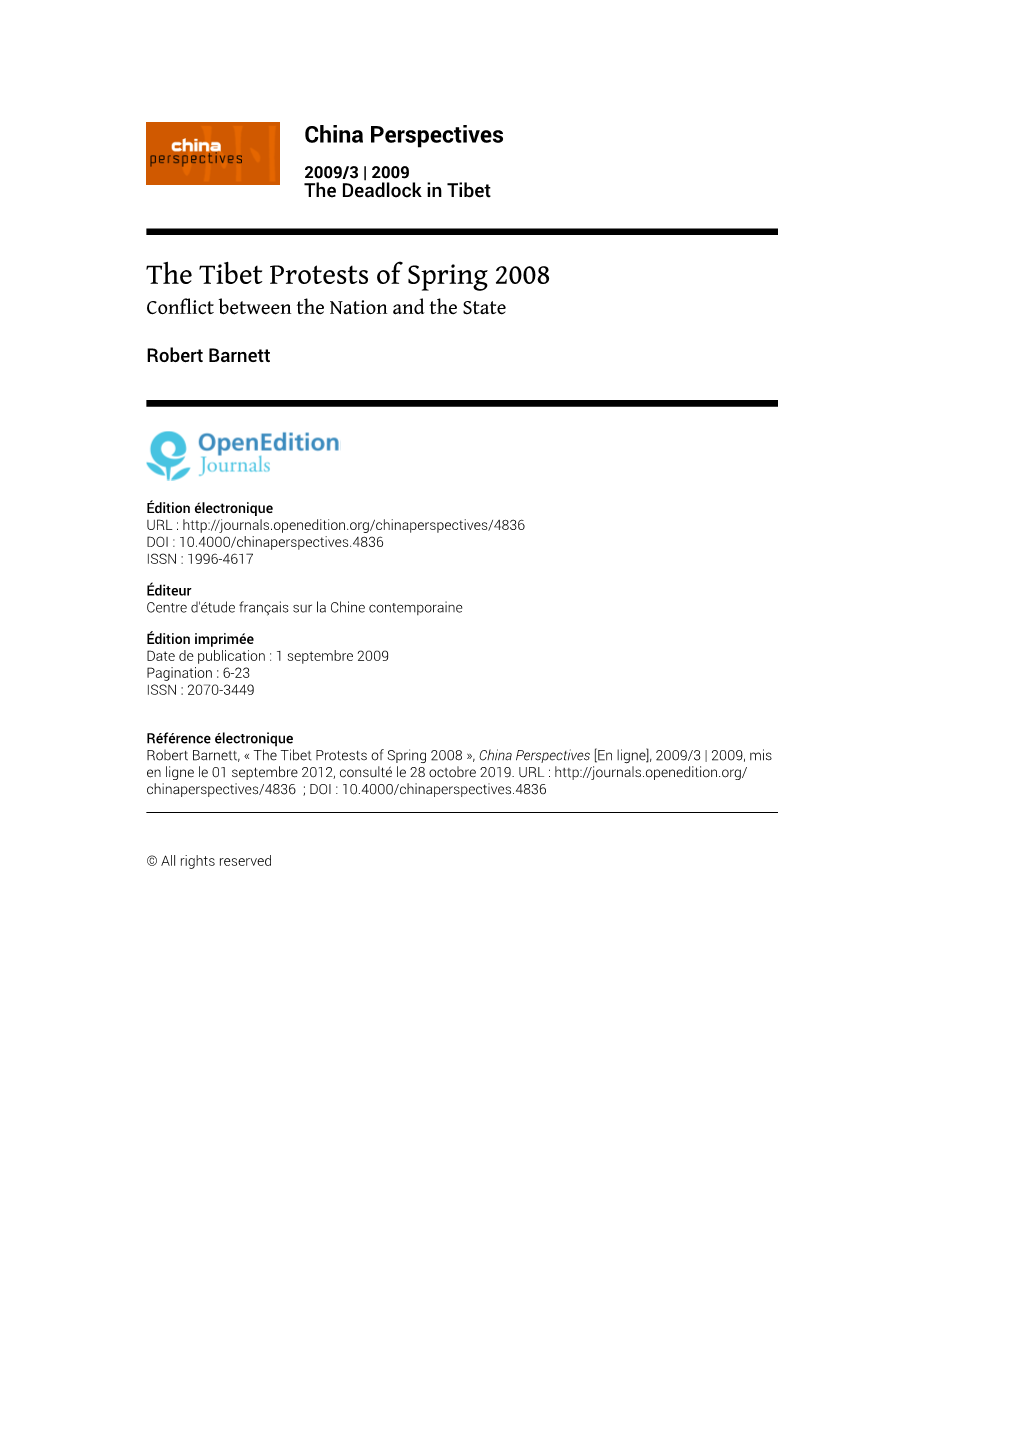 The Tibet Protests of Spring 2008 Conflict Between the Nation and the State